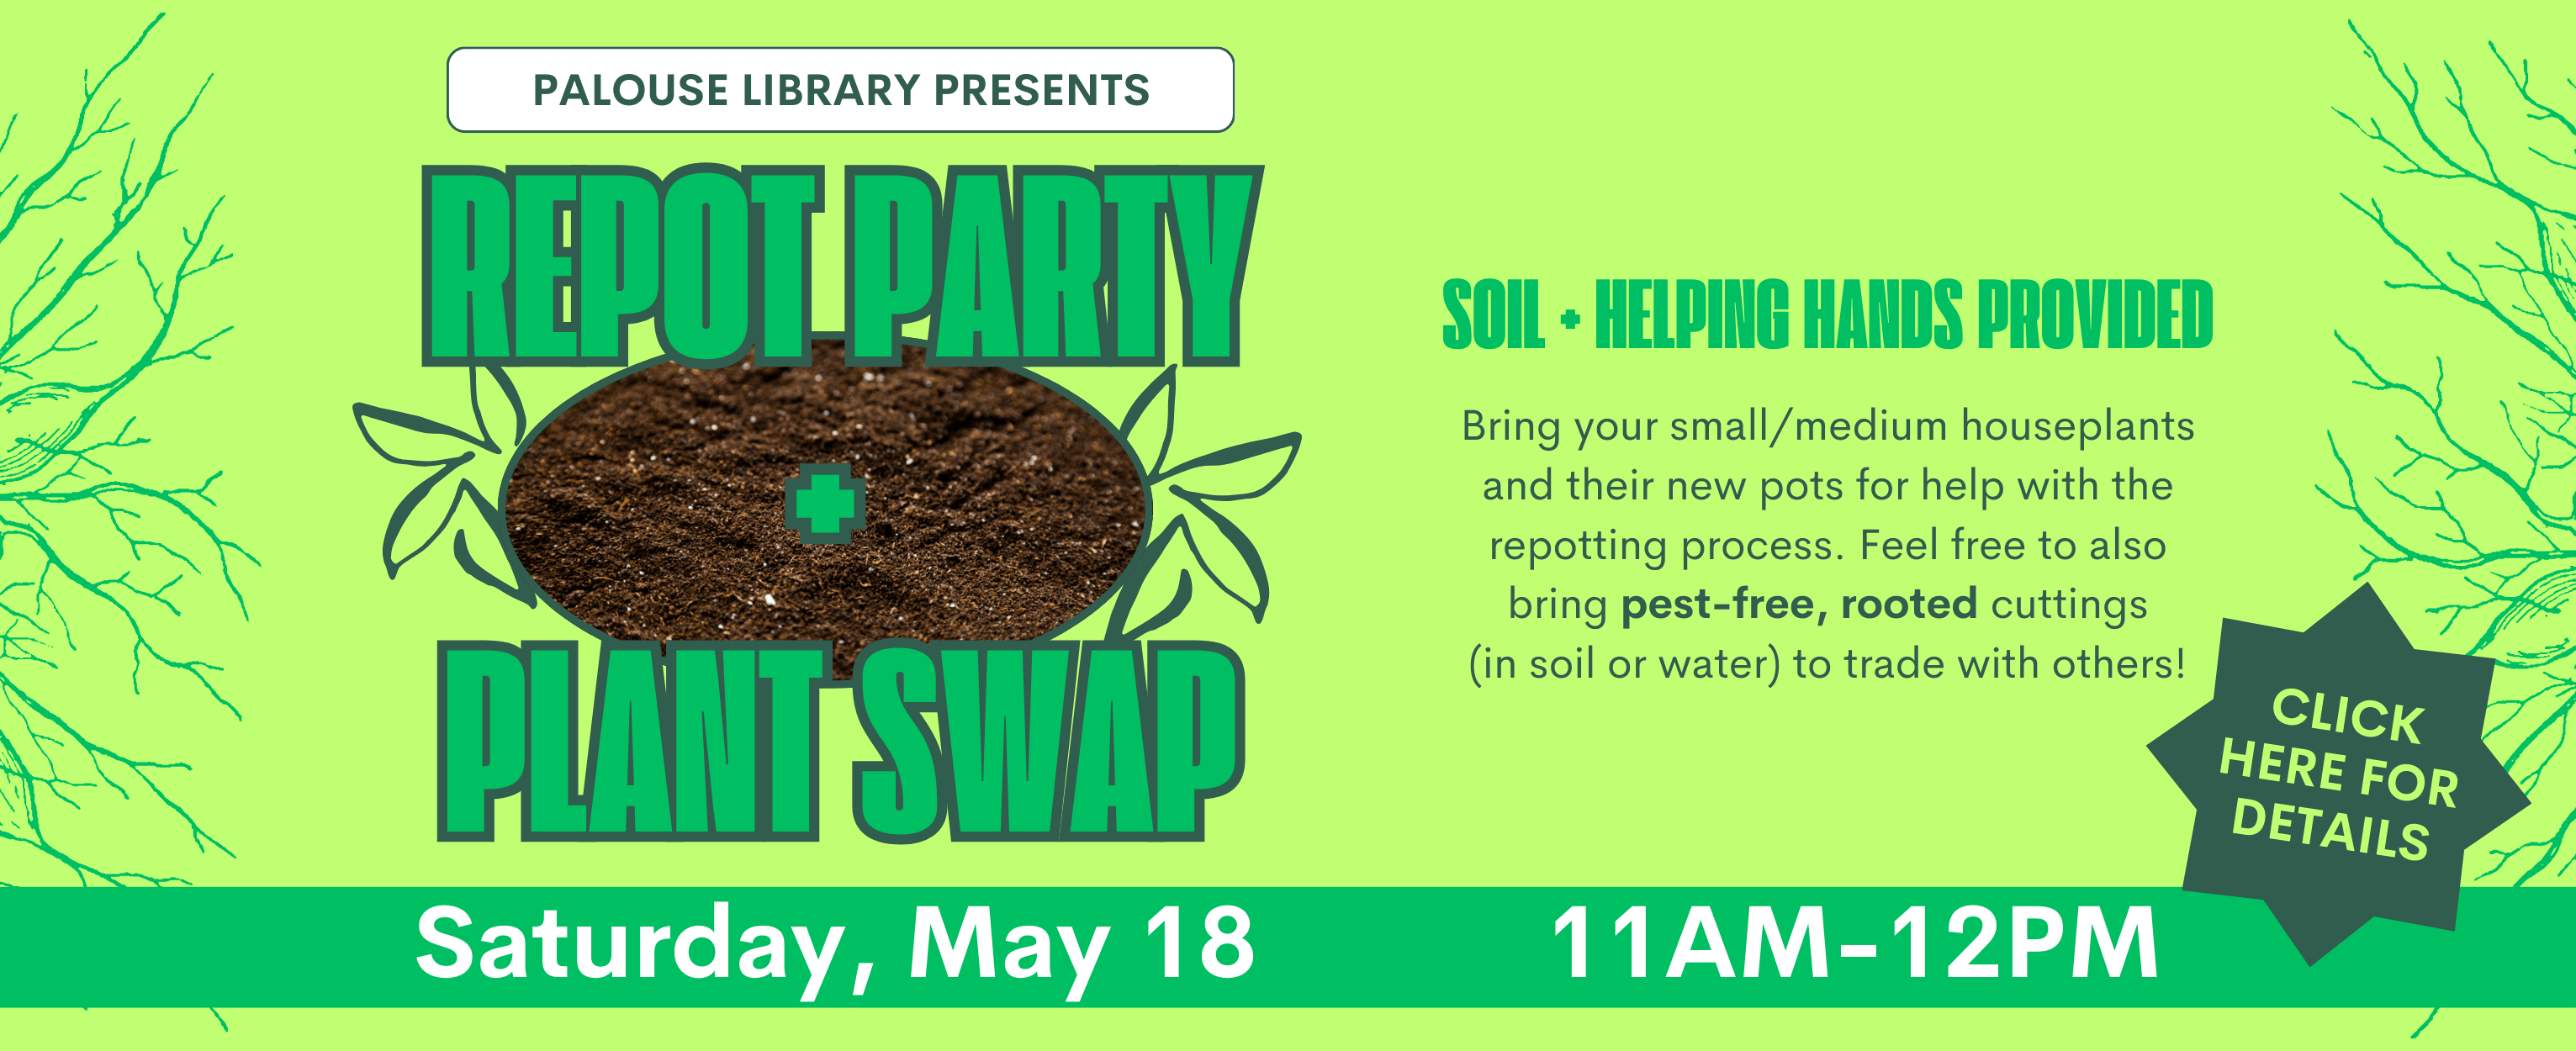 Head on out to the Palouse Library for their Repot Party and Plant Swap on Saturday, May 18 from 11AM-12PM. Click here for details. 